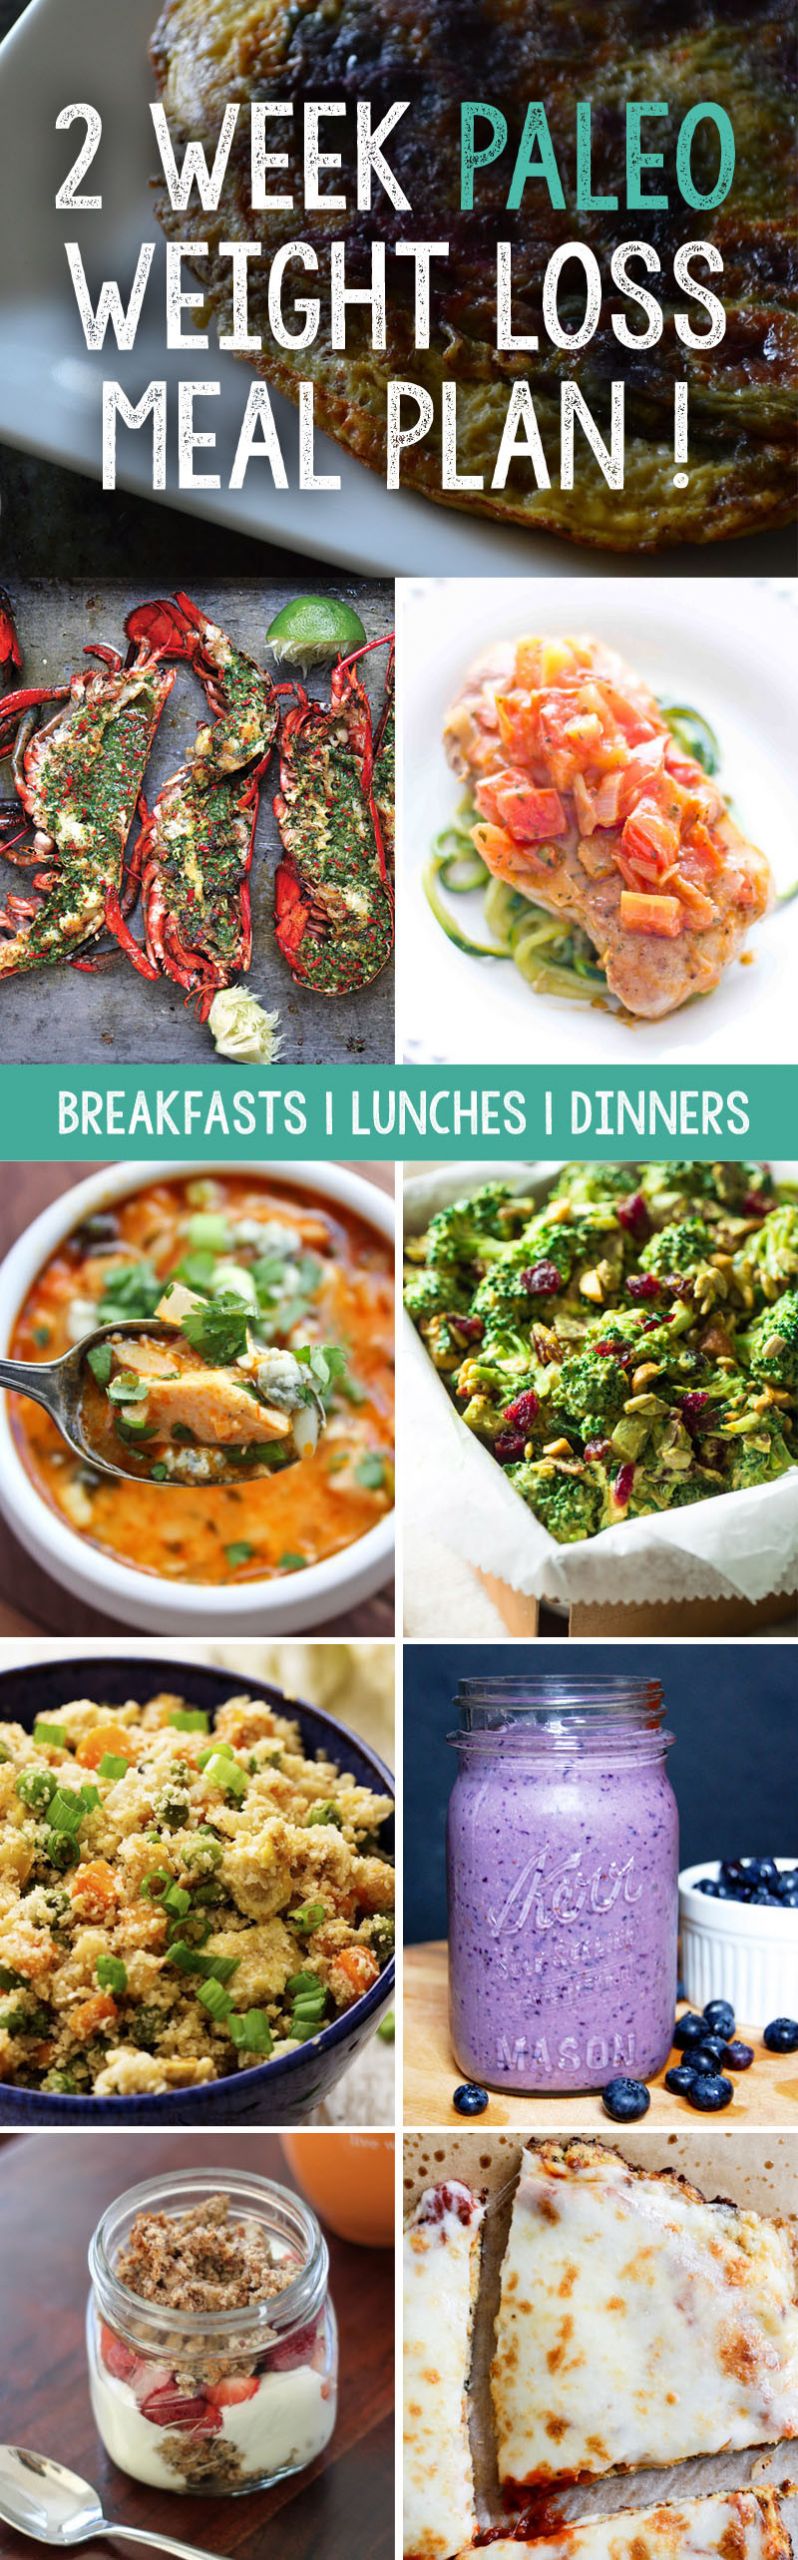 Healthy Recipes For Two Weight Loss
 2 Week Paleo Meal Plan That Will Help You Lose Weight Fast